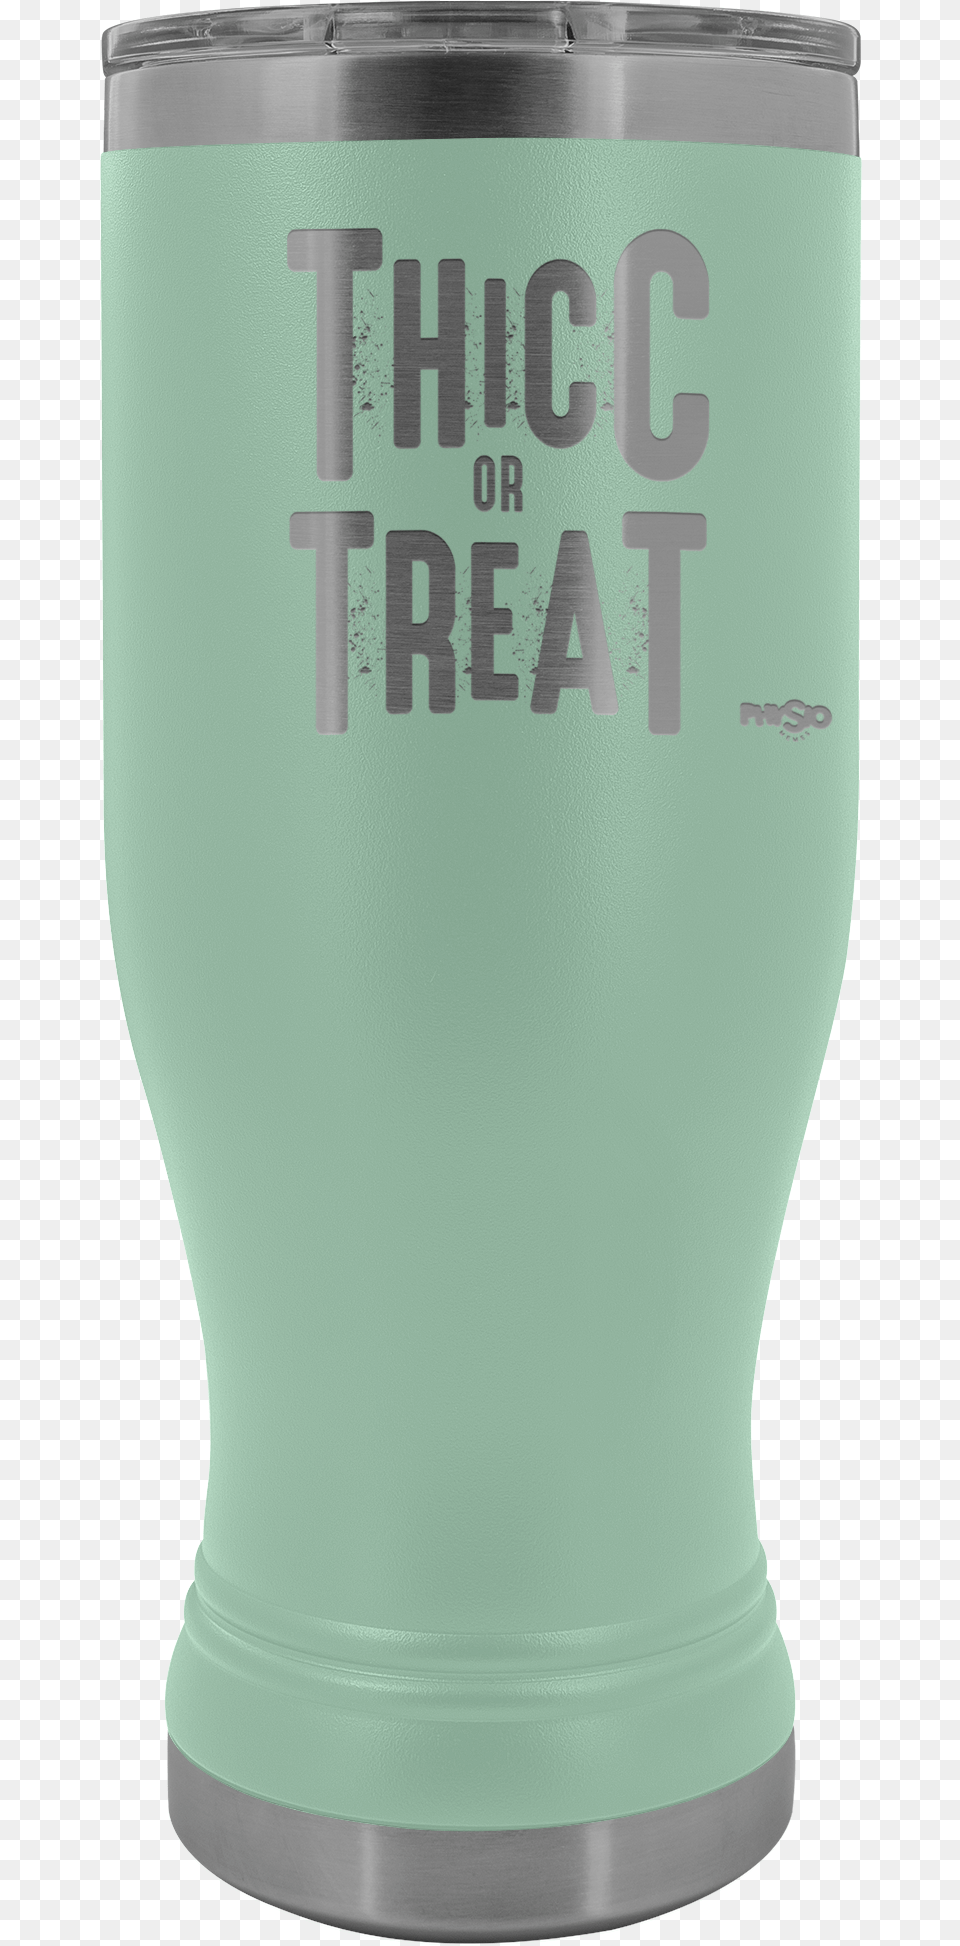 Thicc Or Treat Tumbler Pint Glass, Cup, Tape, Alcohol, Beer Png Image